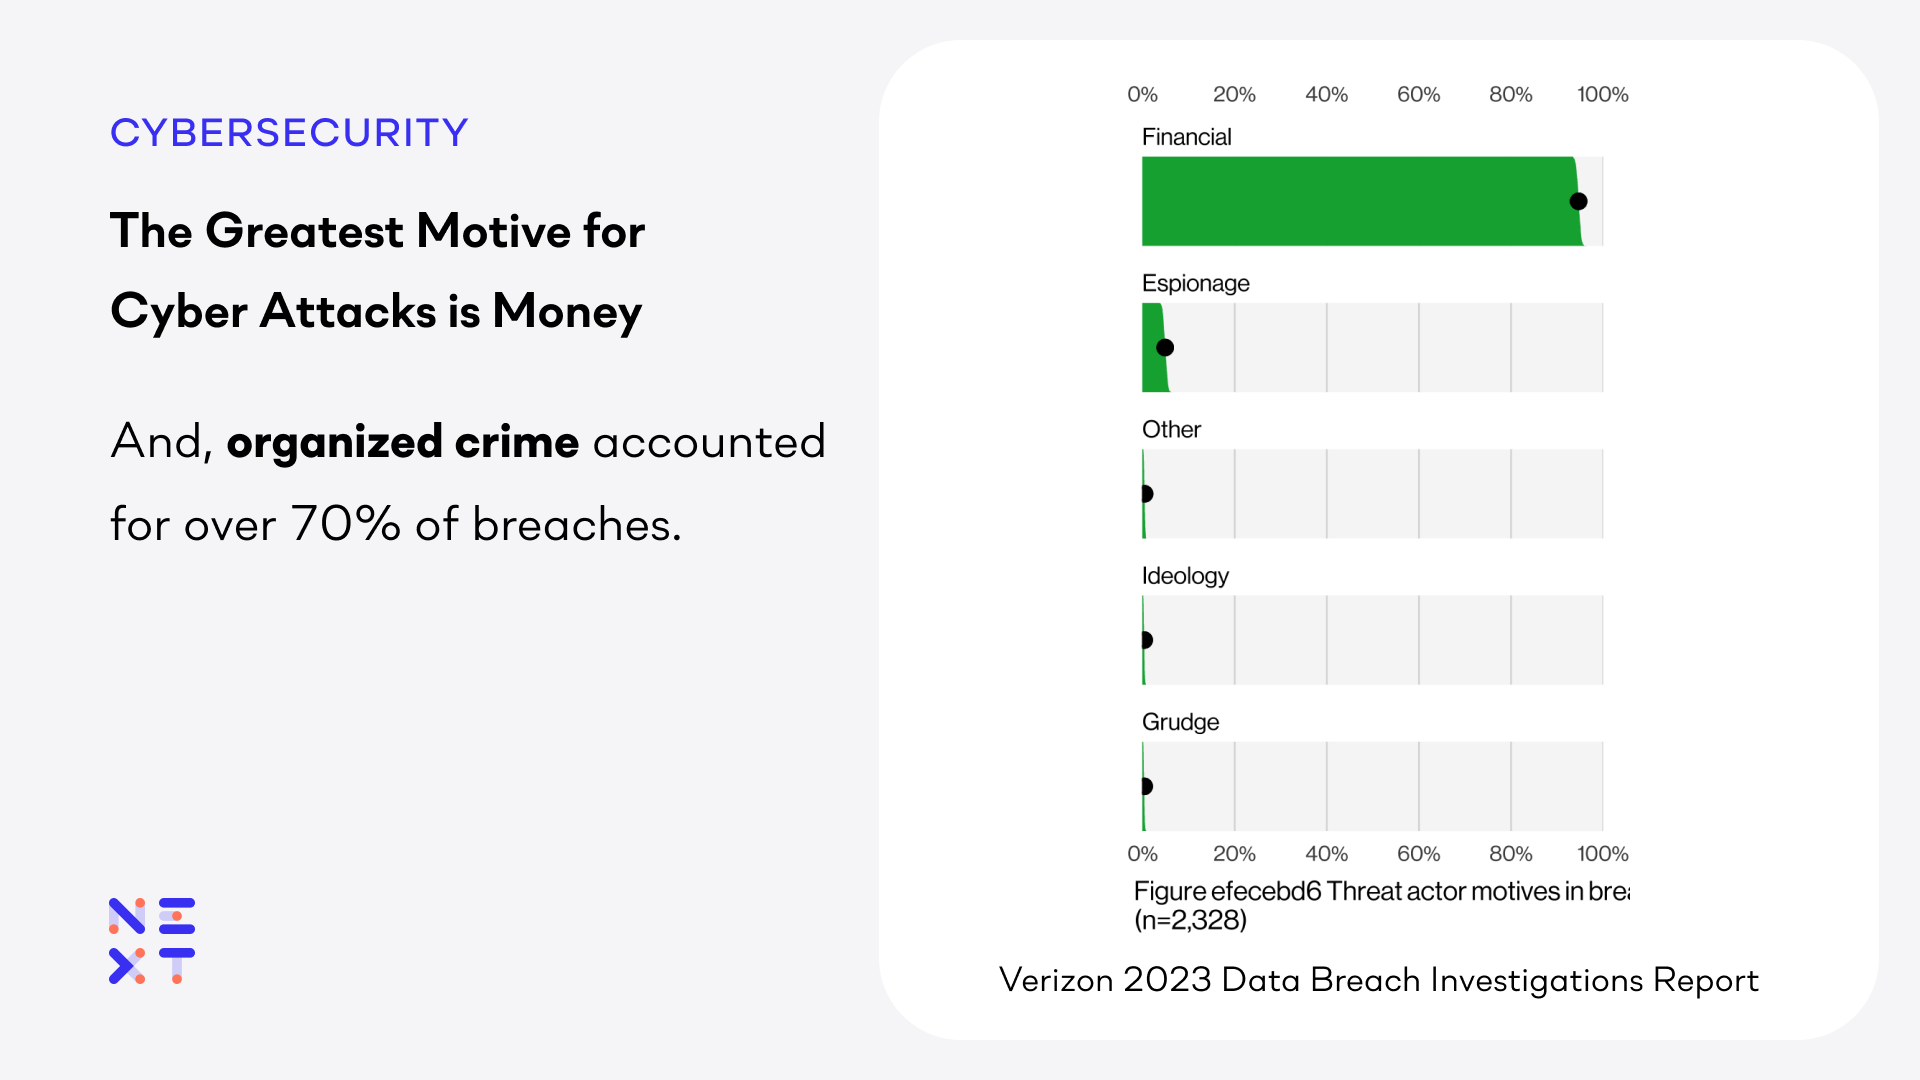 The 2023 Verizon DBIR report says the greatest motive for cyber attacks is money